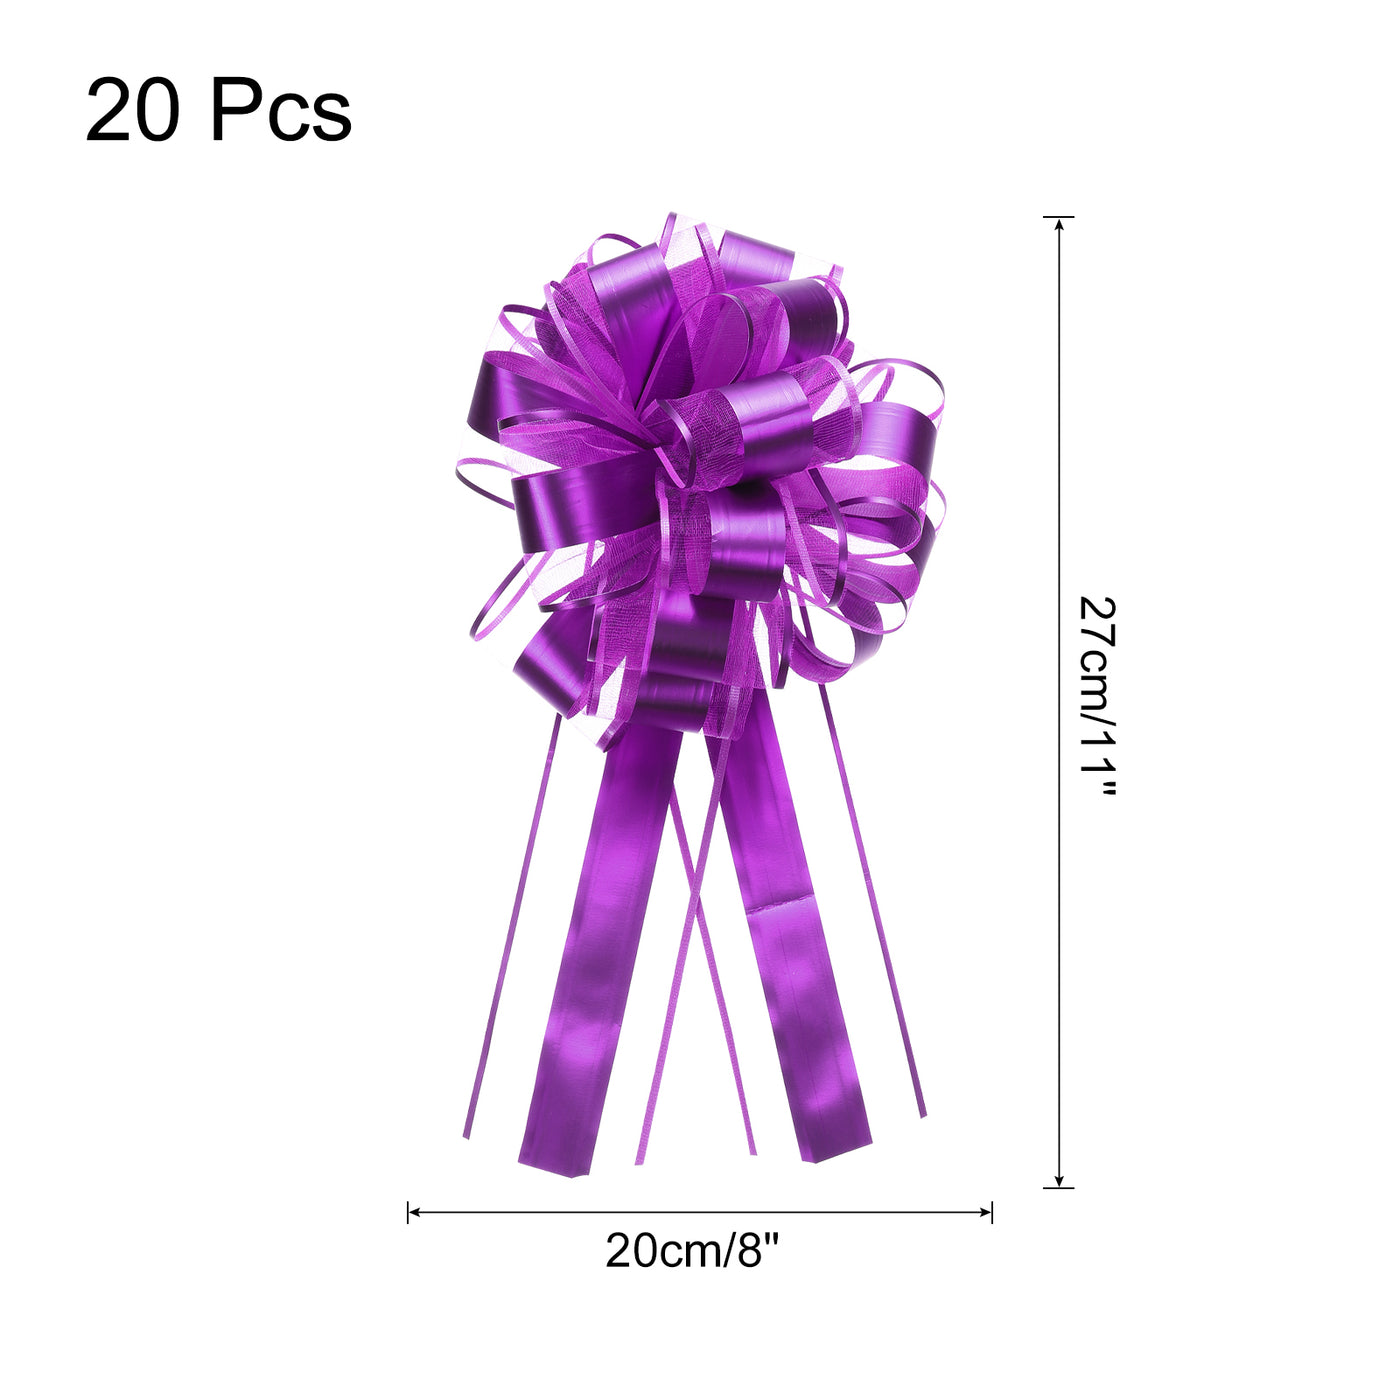 uxcell Uxcell 20pcs 11" Large Pull Bow Metallic Gift Wrapping Bows Ribbon Deep Purple